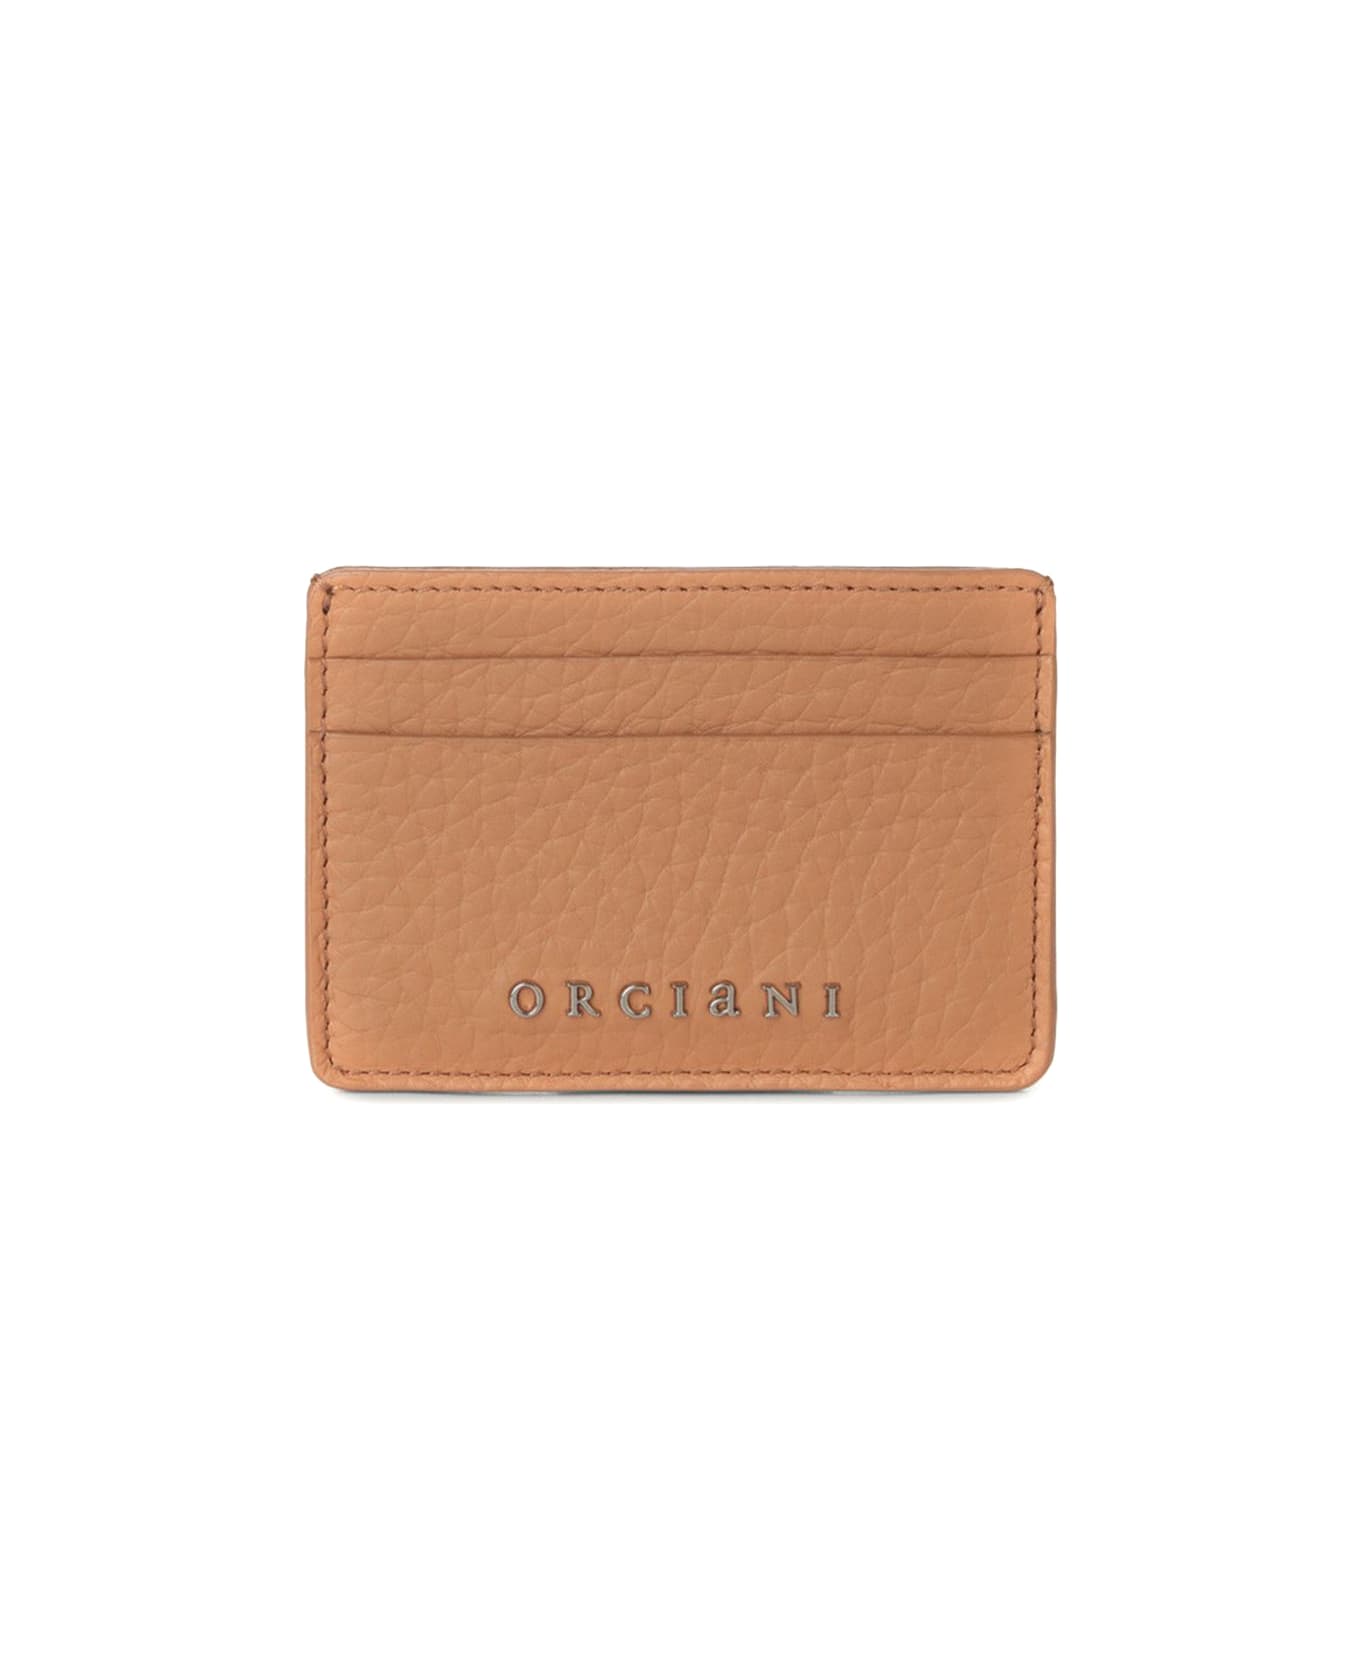 Orciani Brown Soft Leather Card Holder - Camel クラッチバッグ